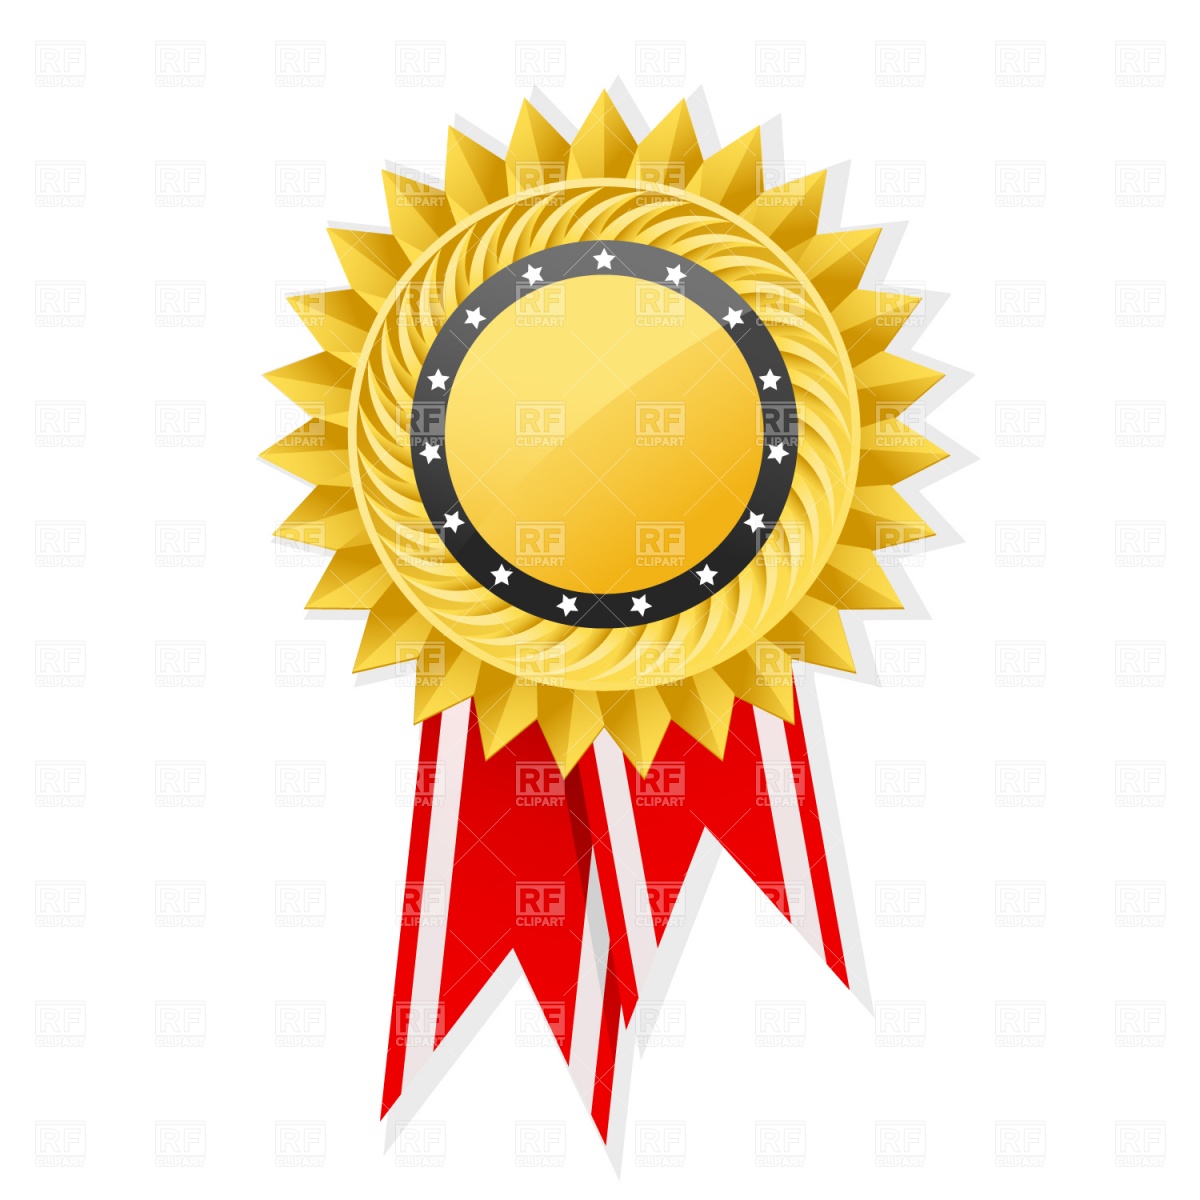 Employment certificate ⋆ Free Vectors, Logos, Icons and Photos 